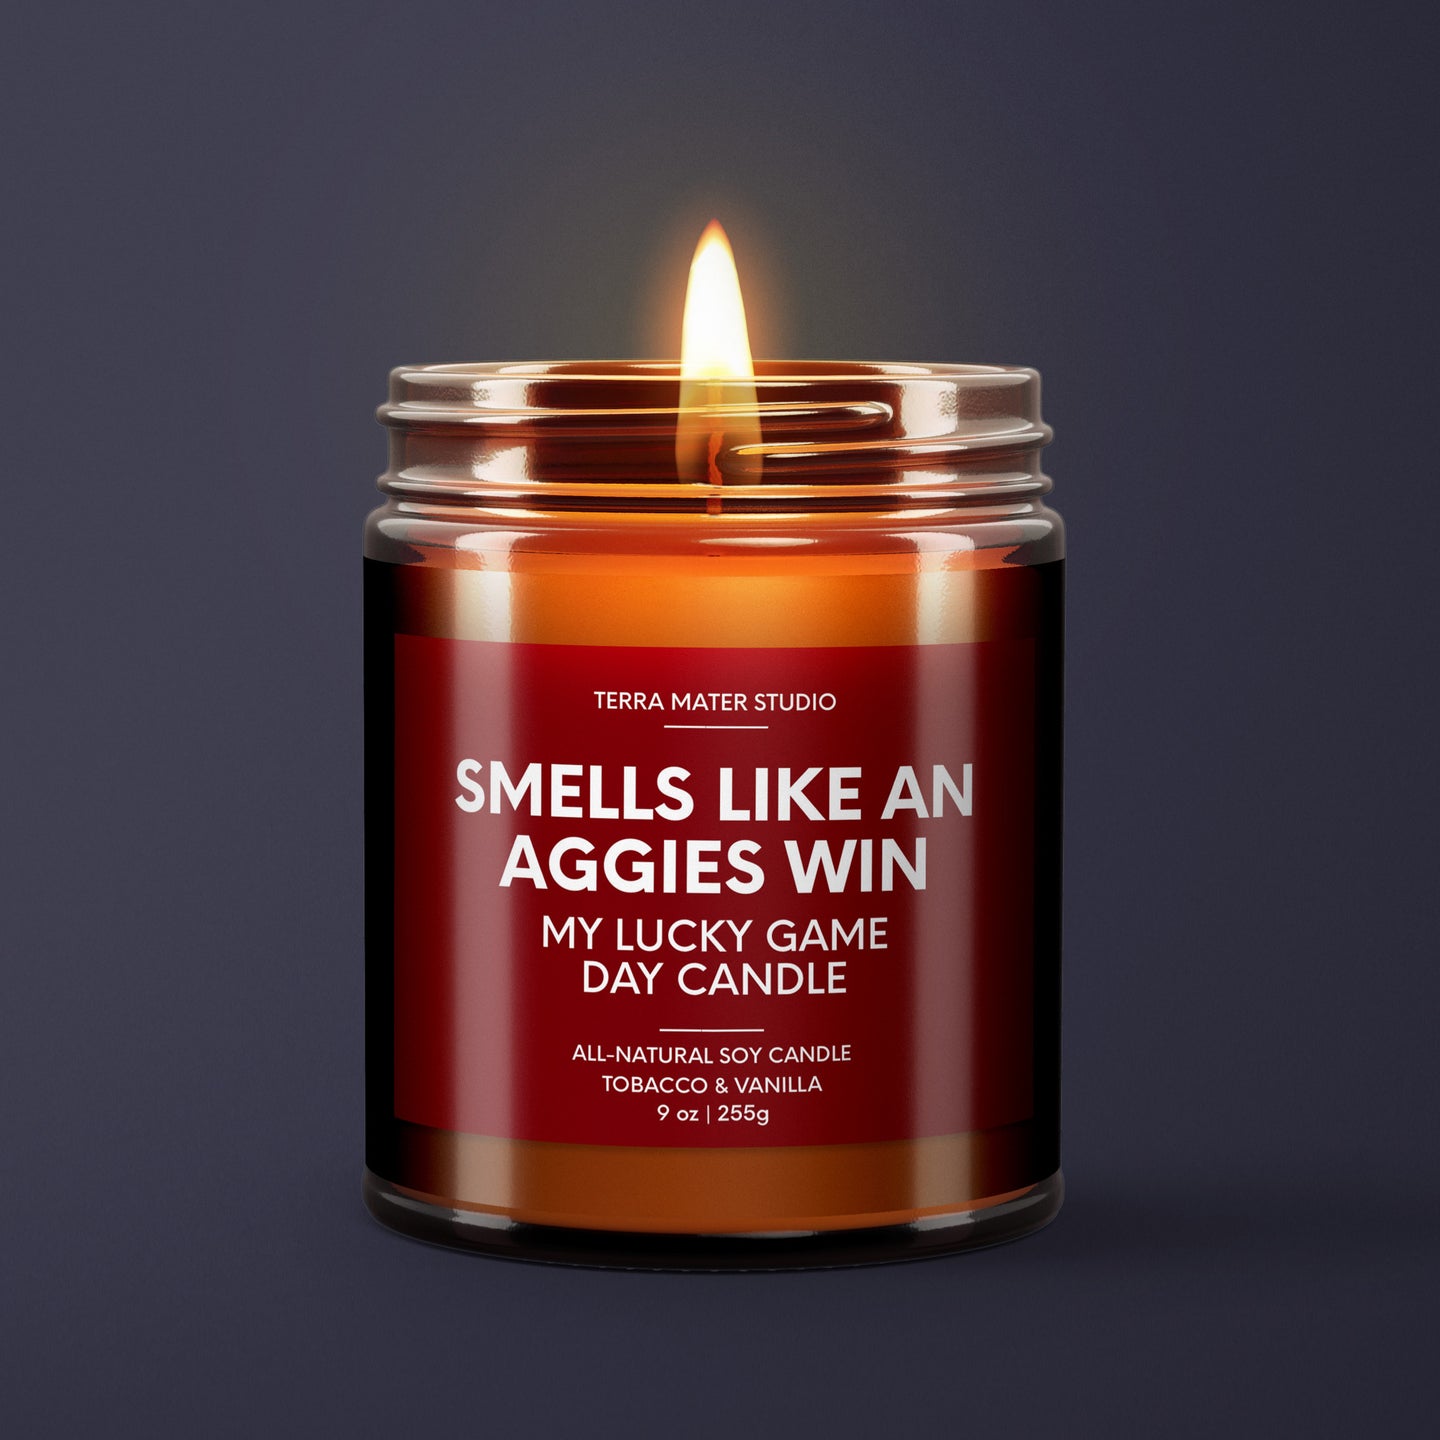 Smells Like An Aggies Win | Texas Lucky Game Day Candle | Soy Wax Candle